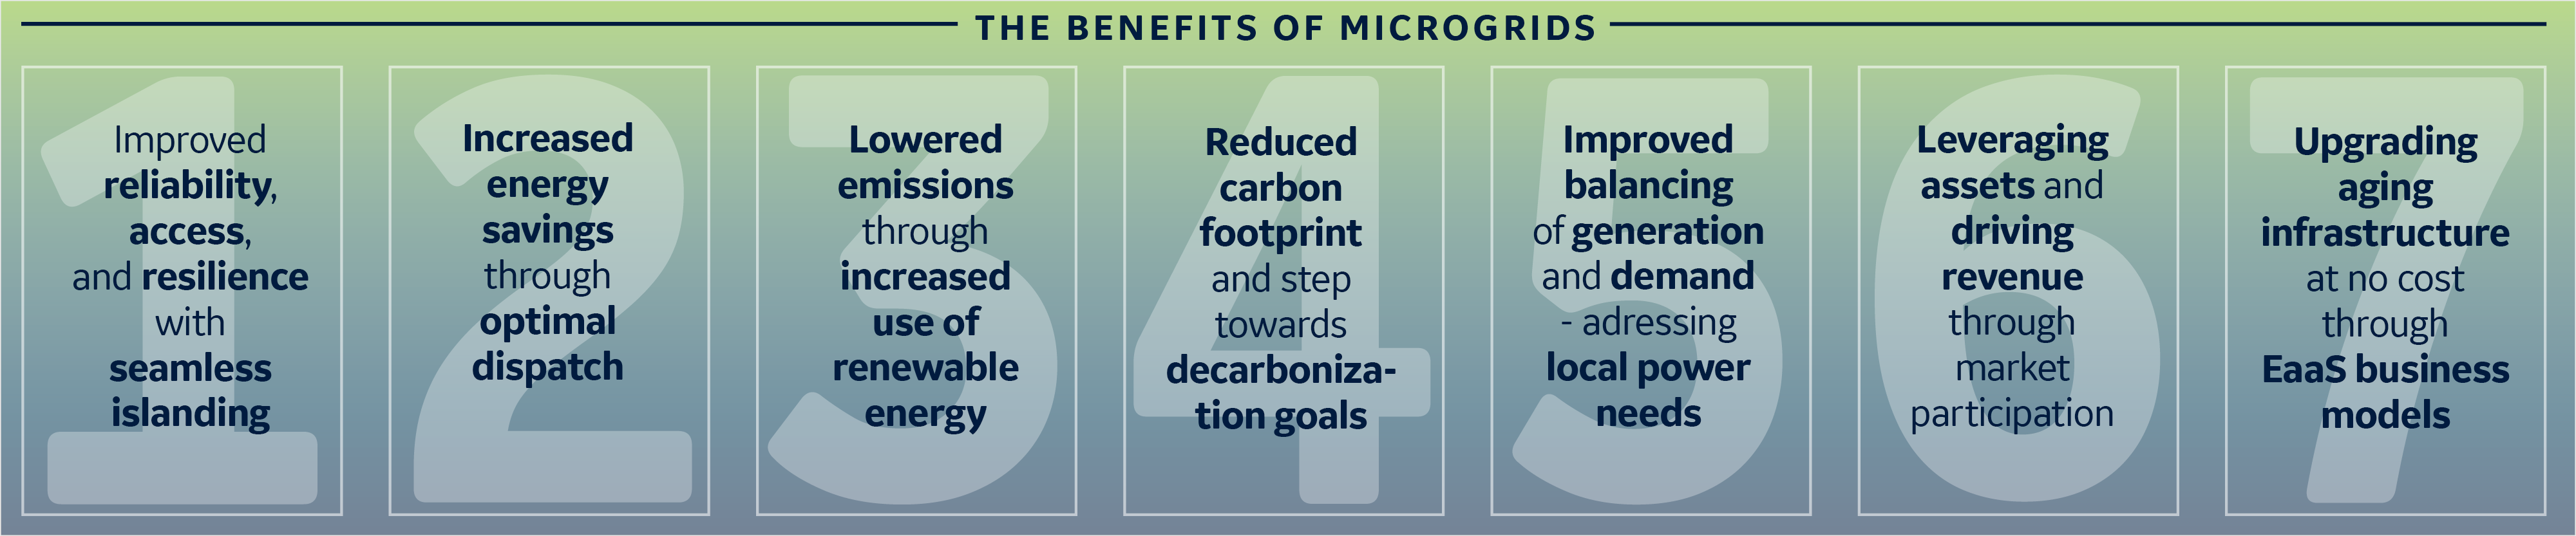 The benefits of microgrids overview infographic